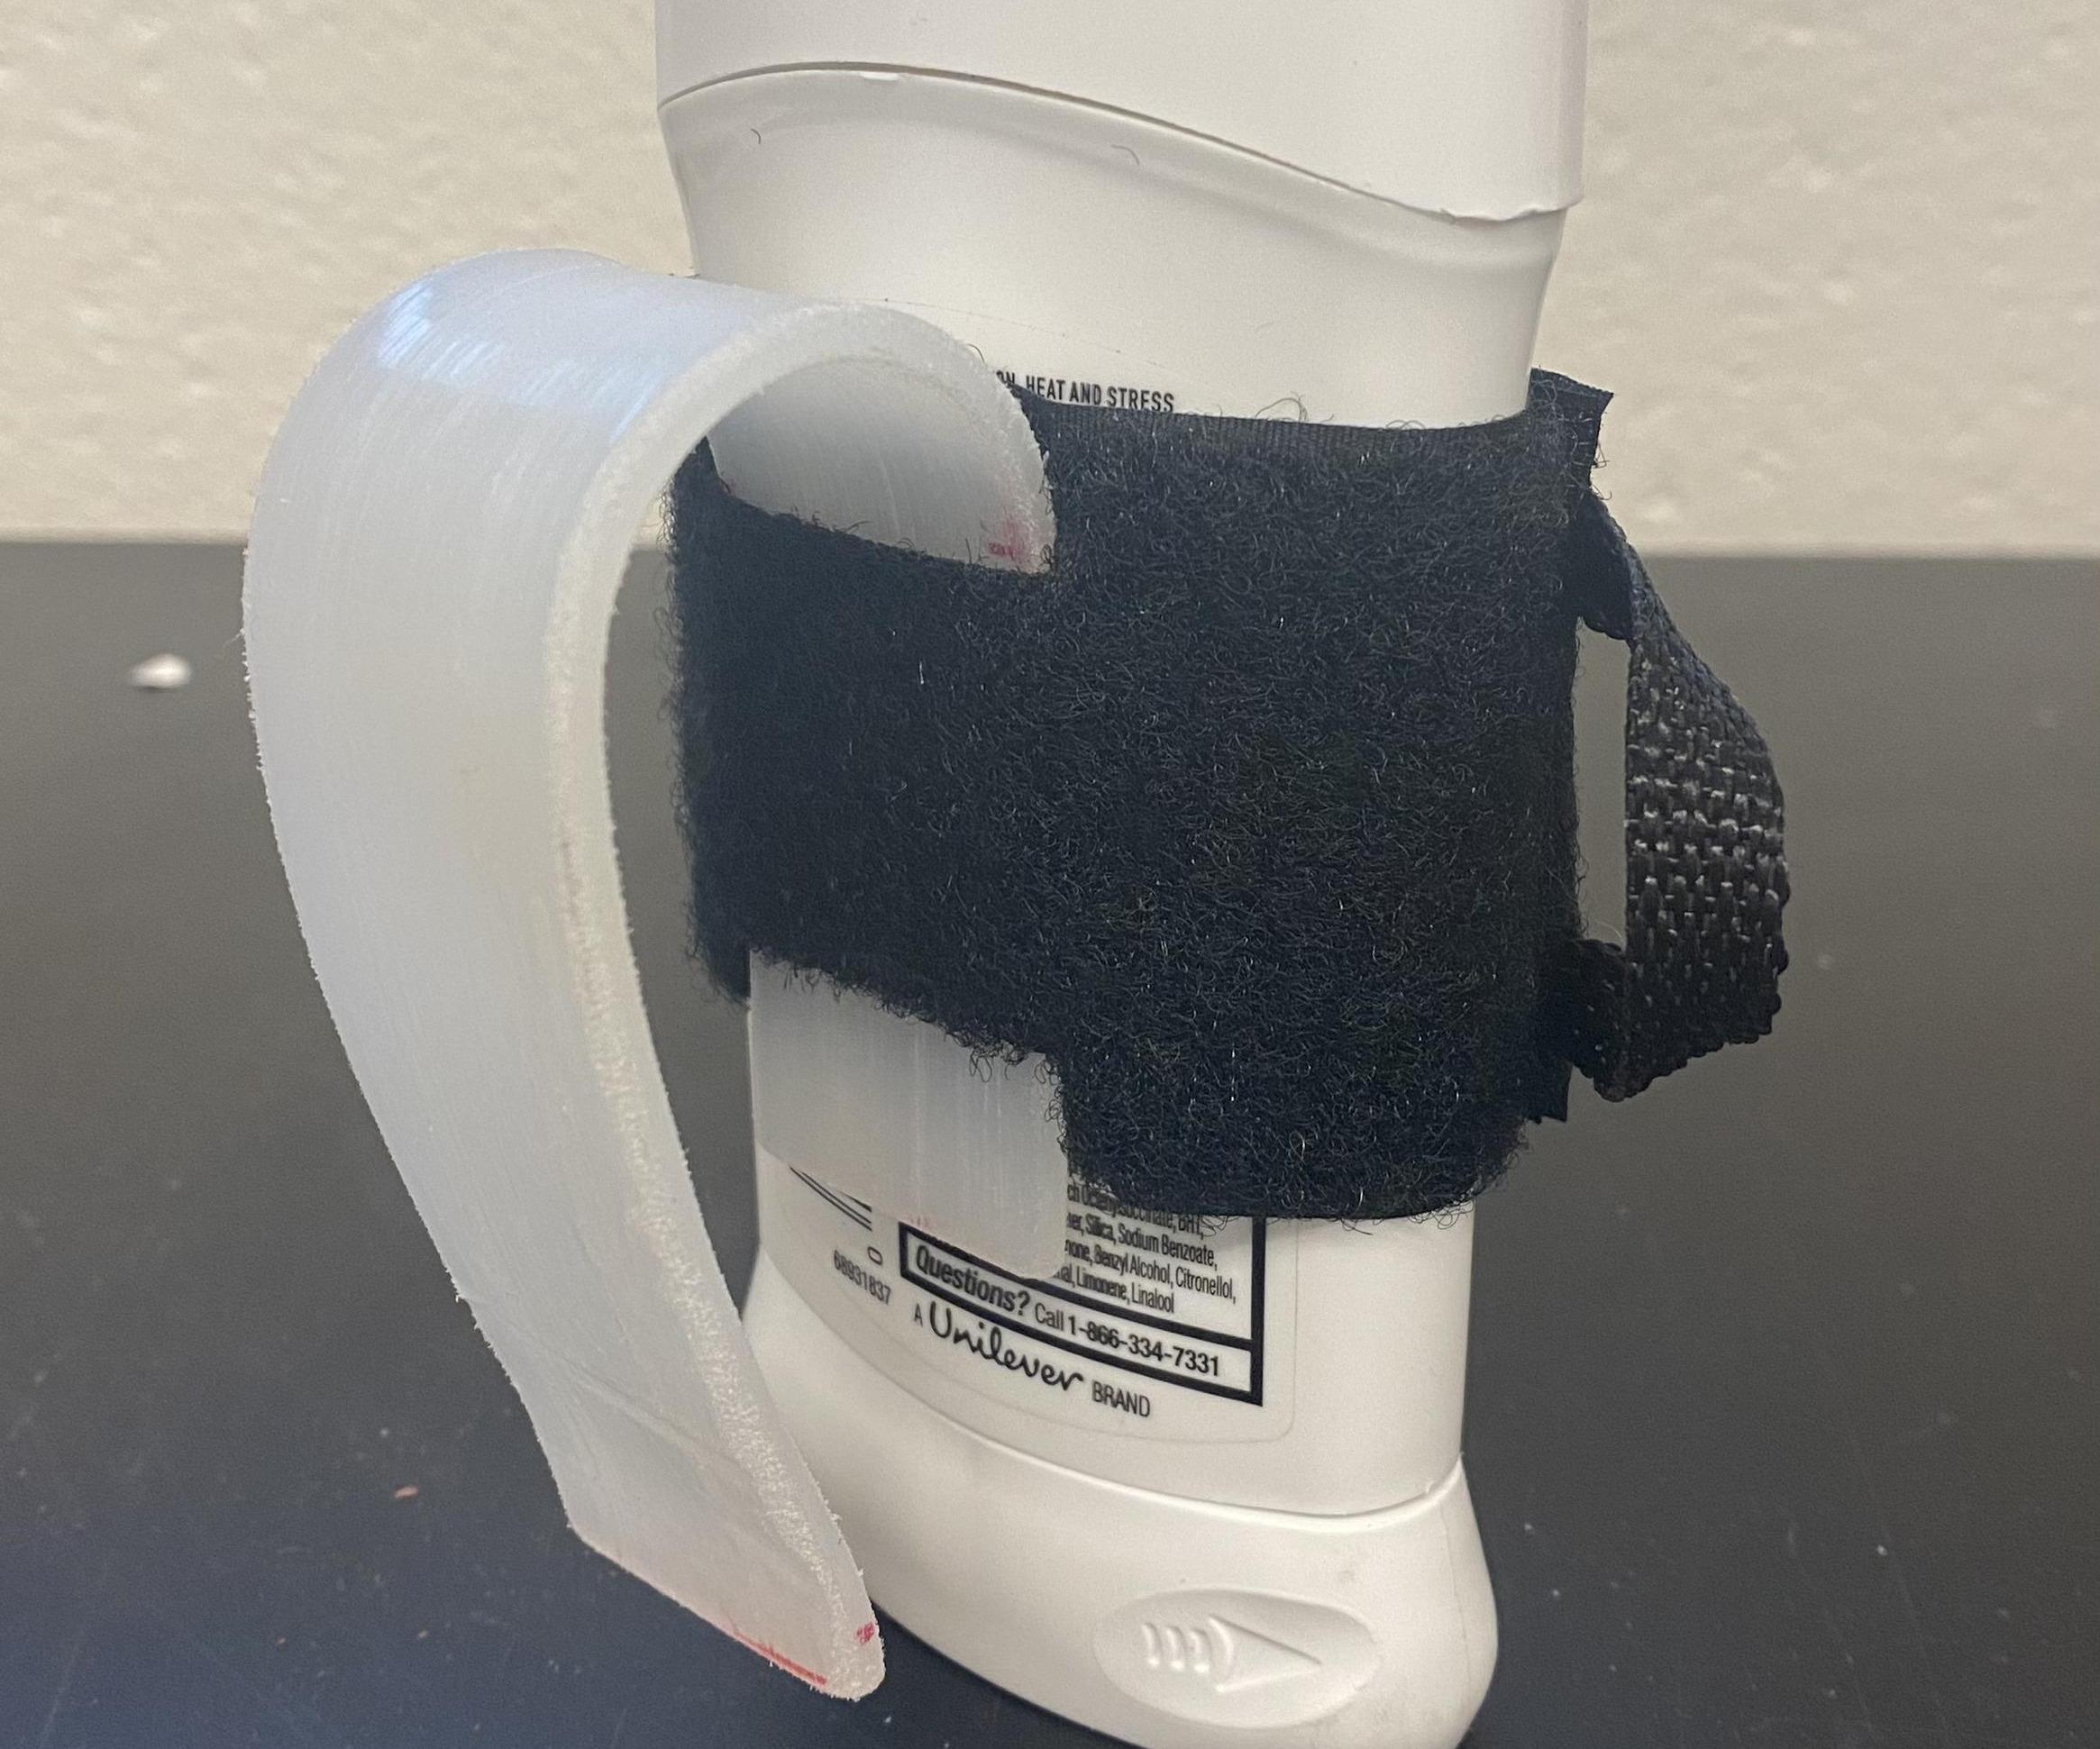 Deodorant Holder for Individuals With Disabilities